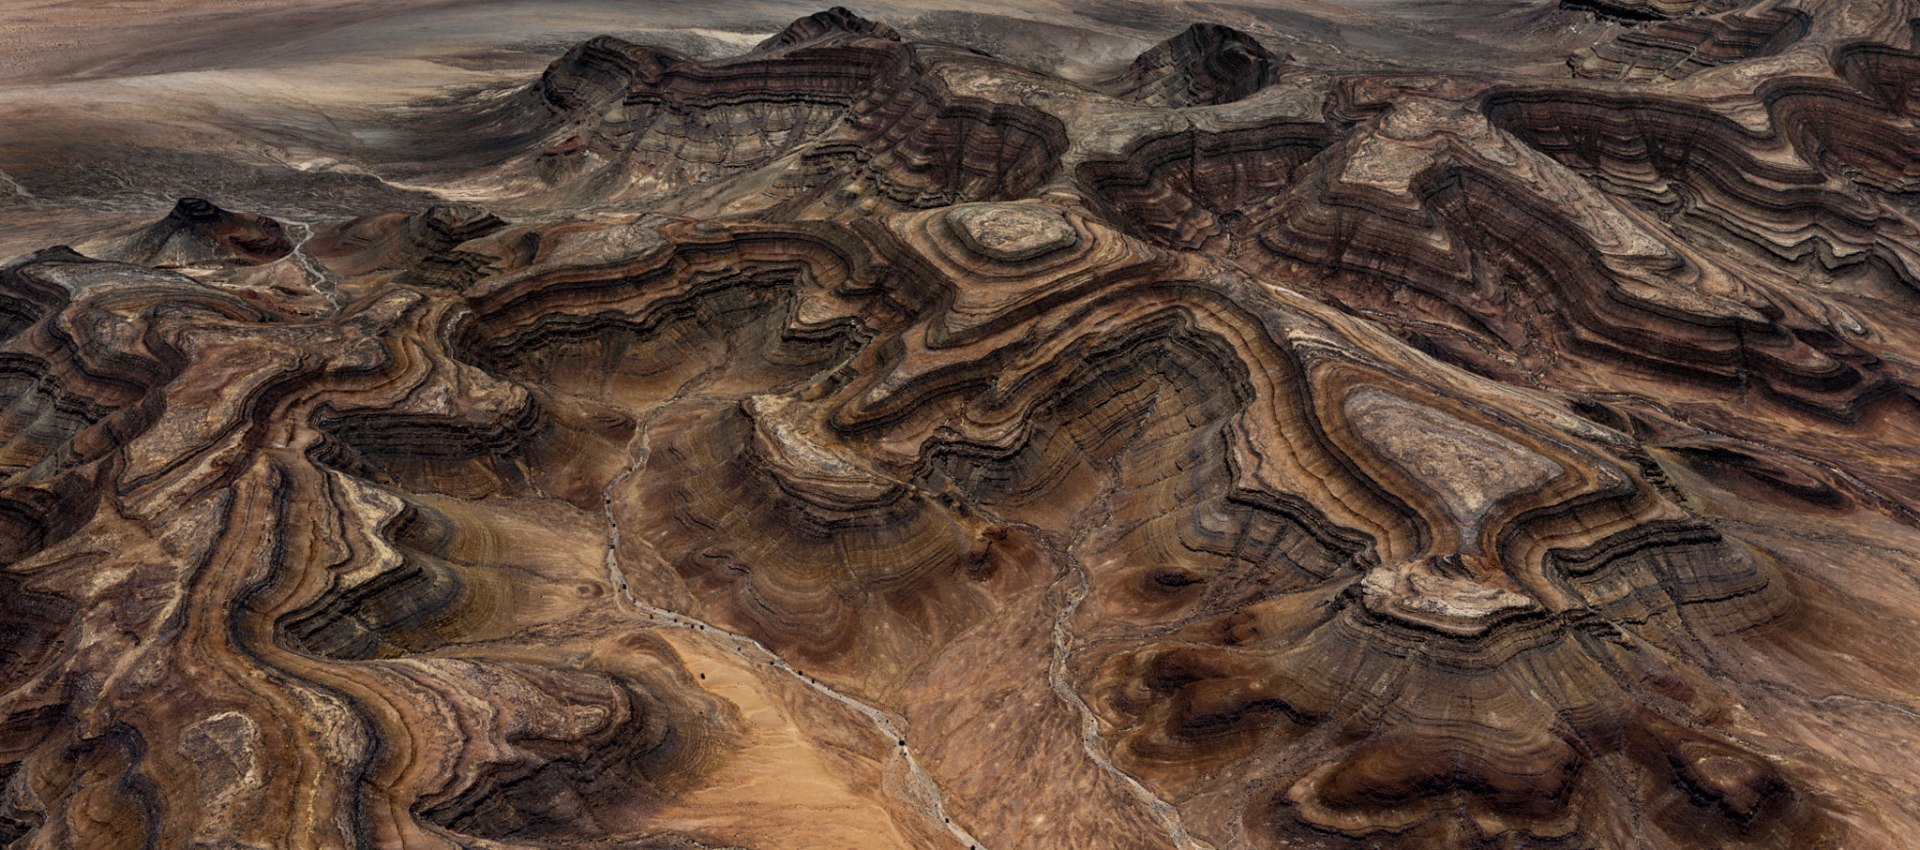 Exhibition: 'Edward Burtynsky: The Residual Landscapes' at The